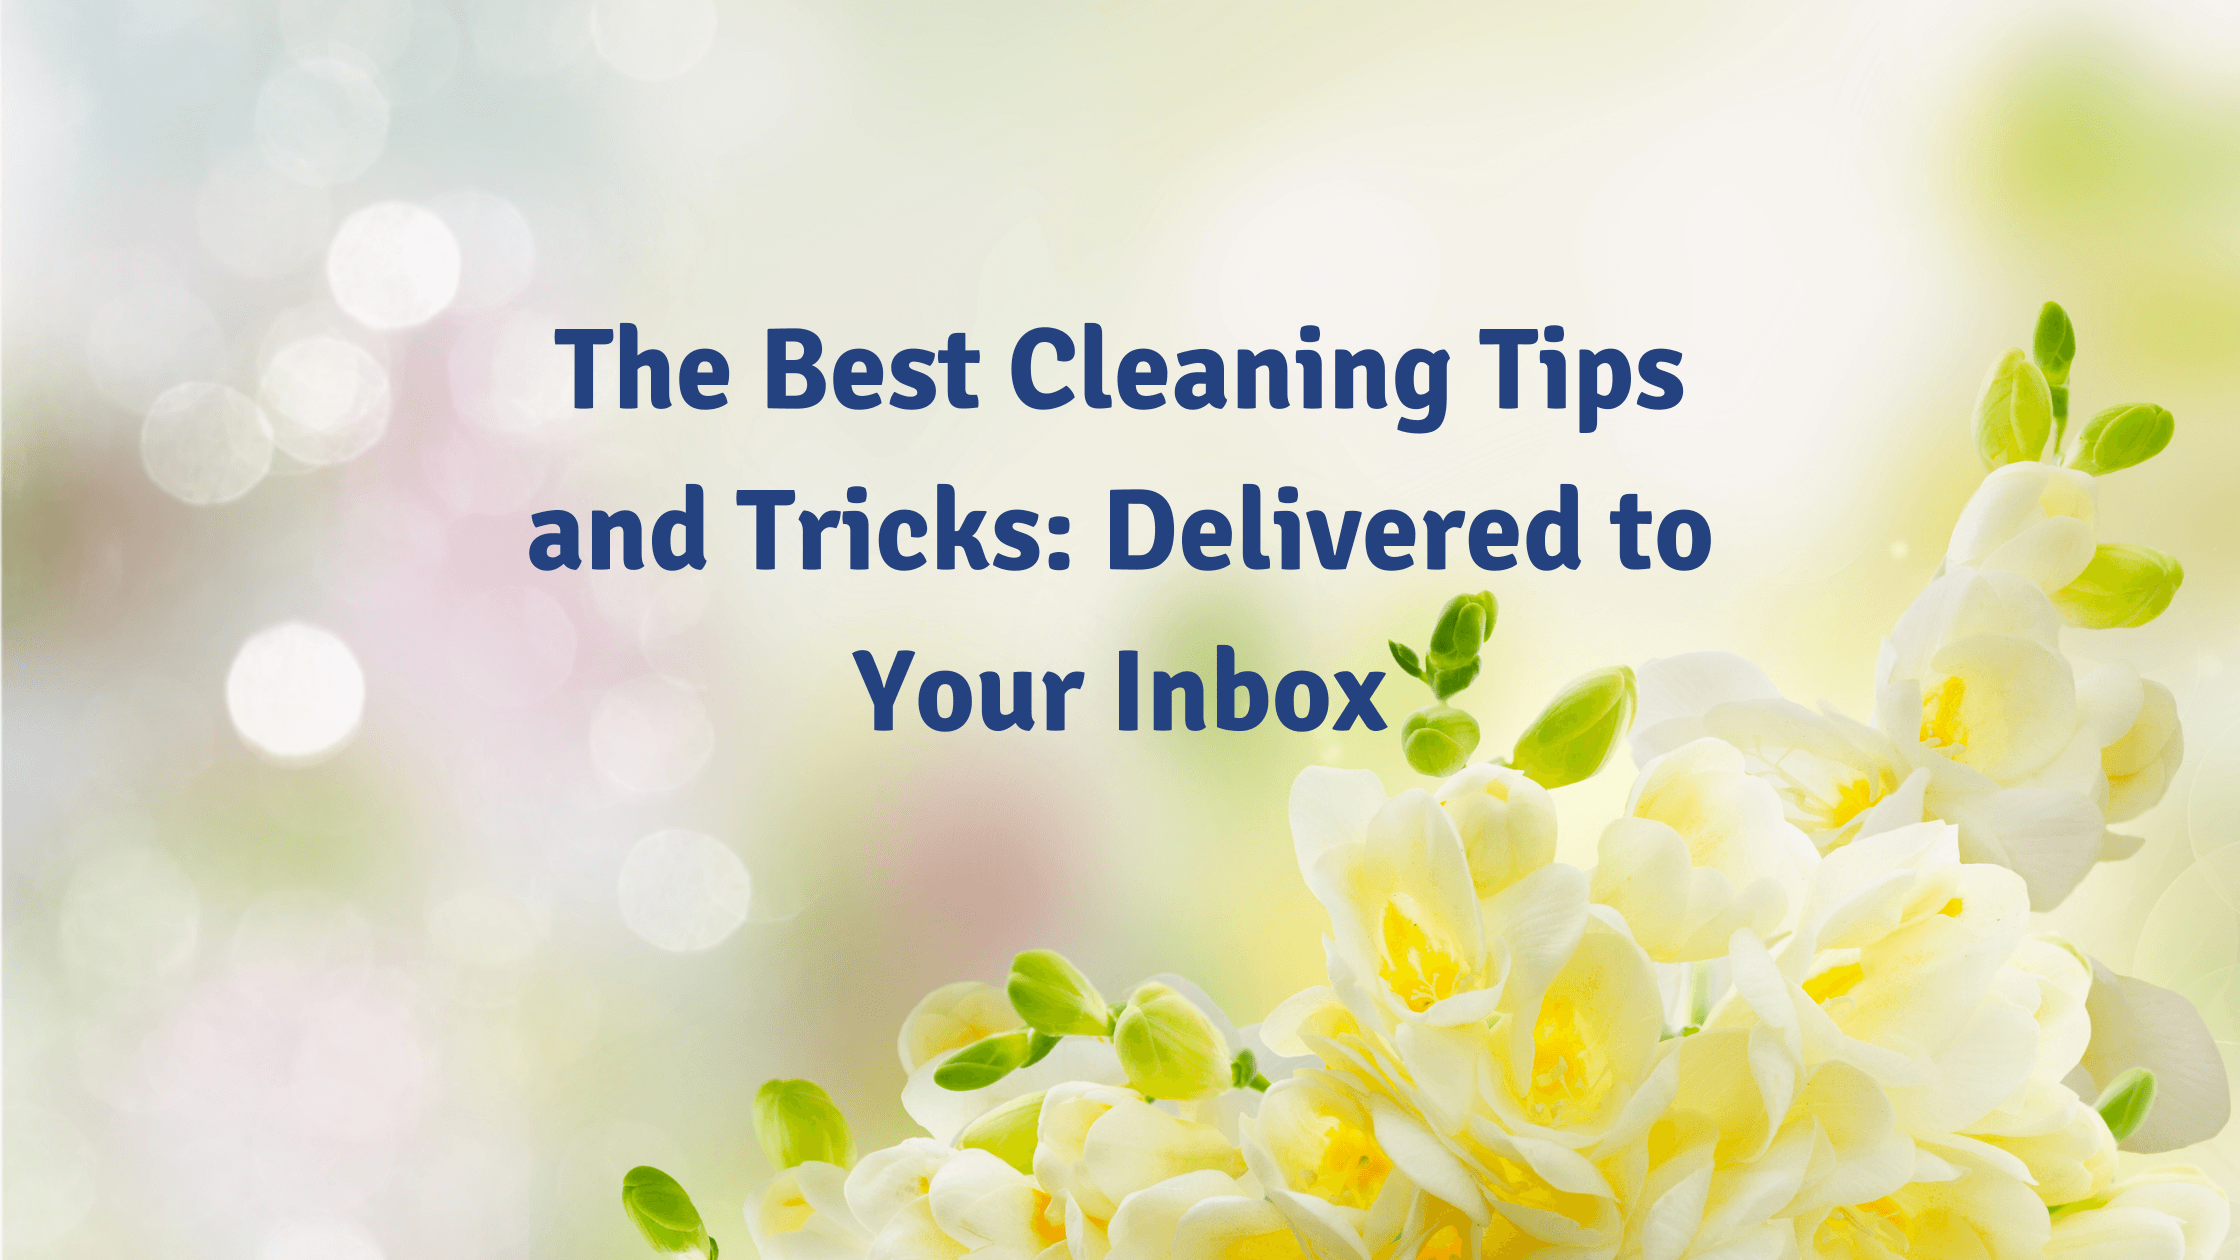 The Best Cleaning Tips and Tricks: Delivered to Your Inbox 2